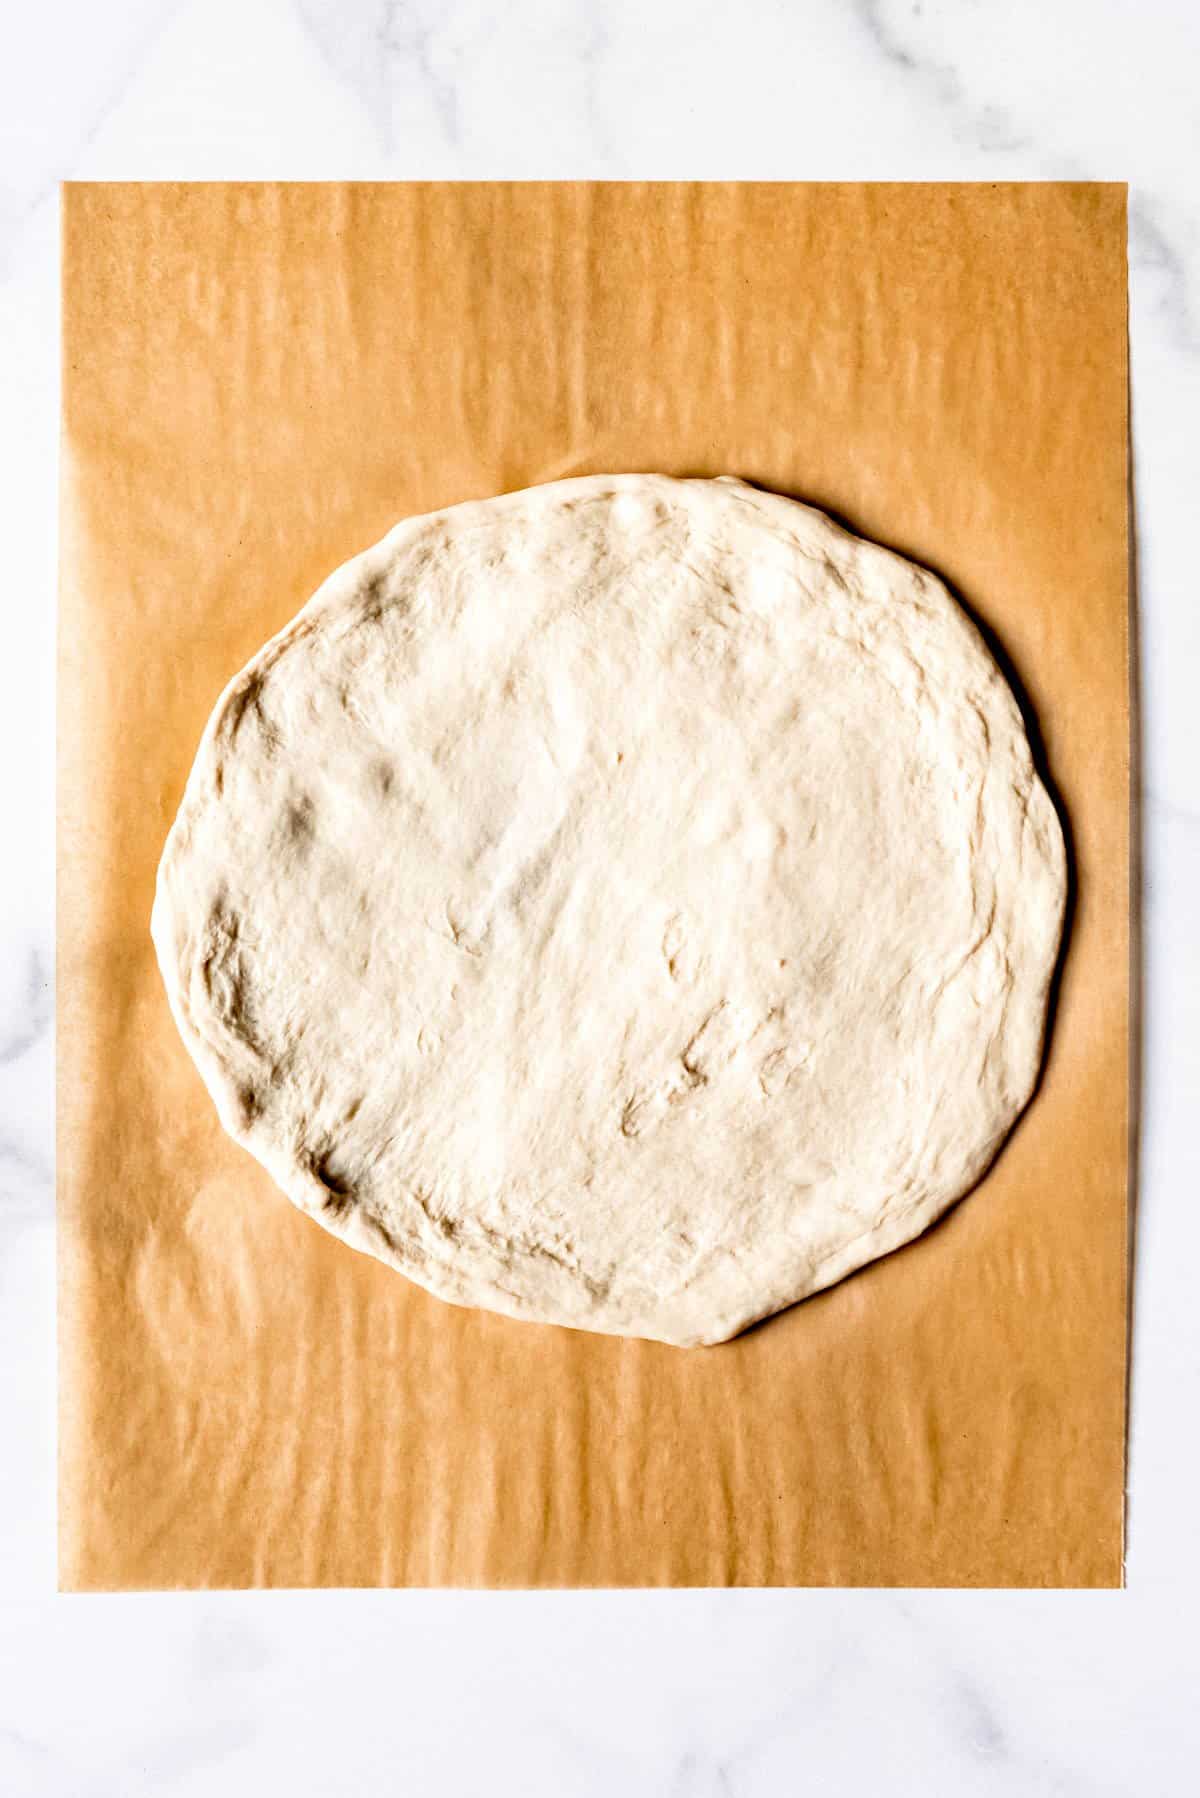 An image of a circle of unbaked pizza dough.